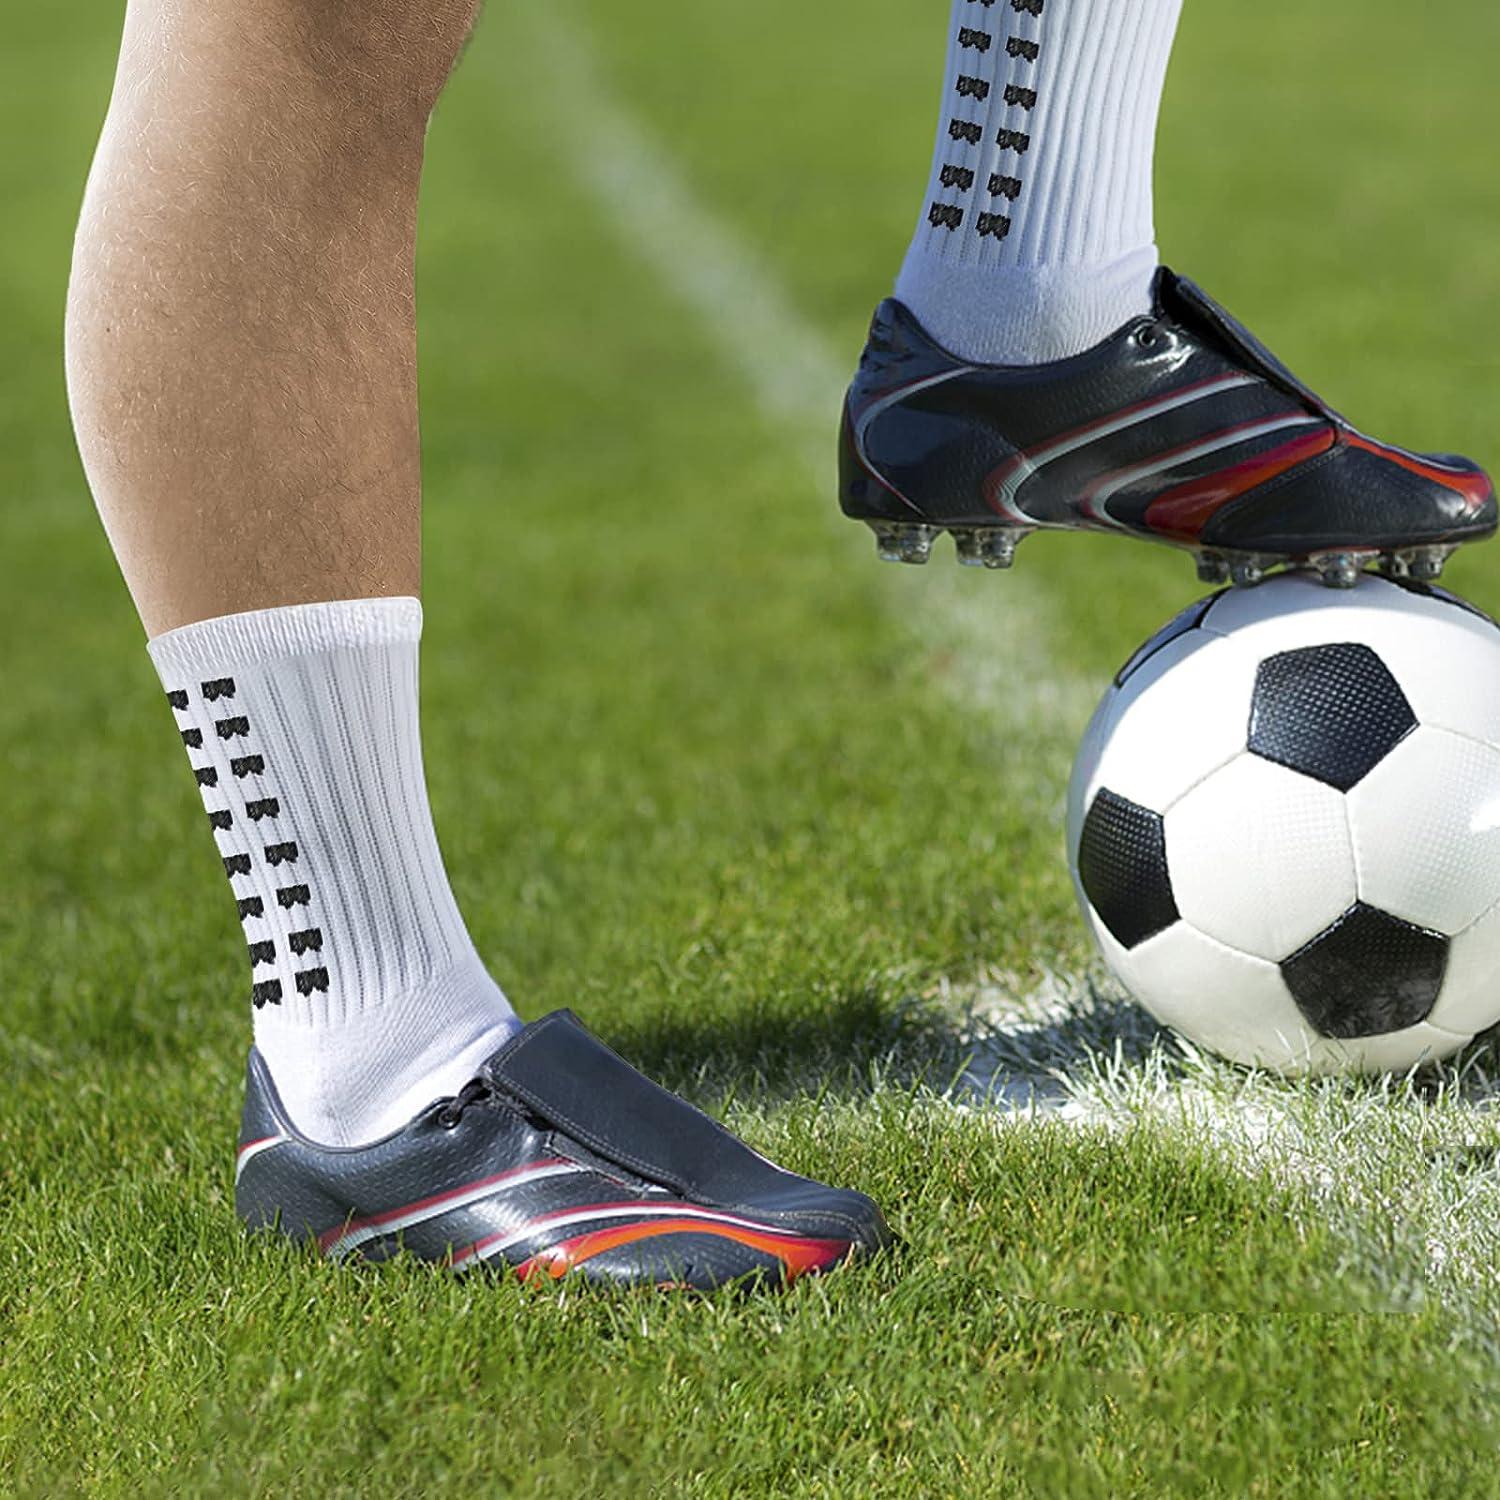 Onside Sports - Football Accessories Get prepared for this season with  Gioca Grip socks, Football boots, guard stays and footless socks. #gioca # sock #socks #soccersocks #footlesssocks #soccerboots #footballsocks  #guardstays #soccerstay